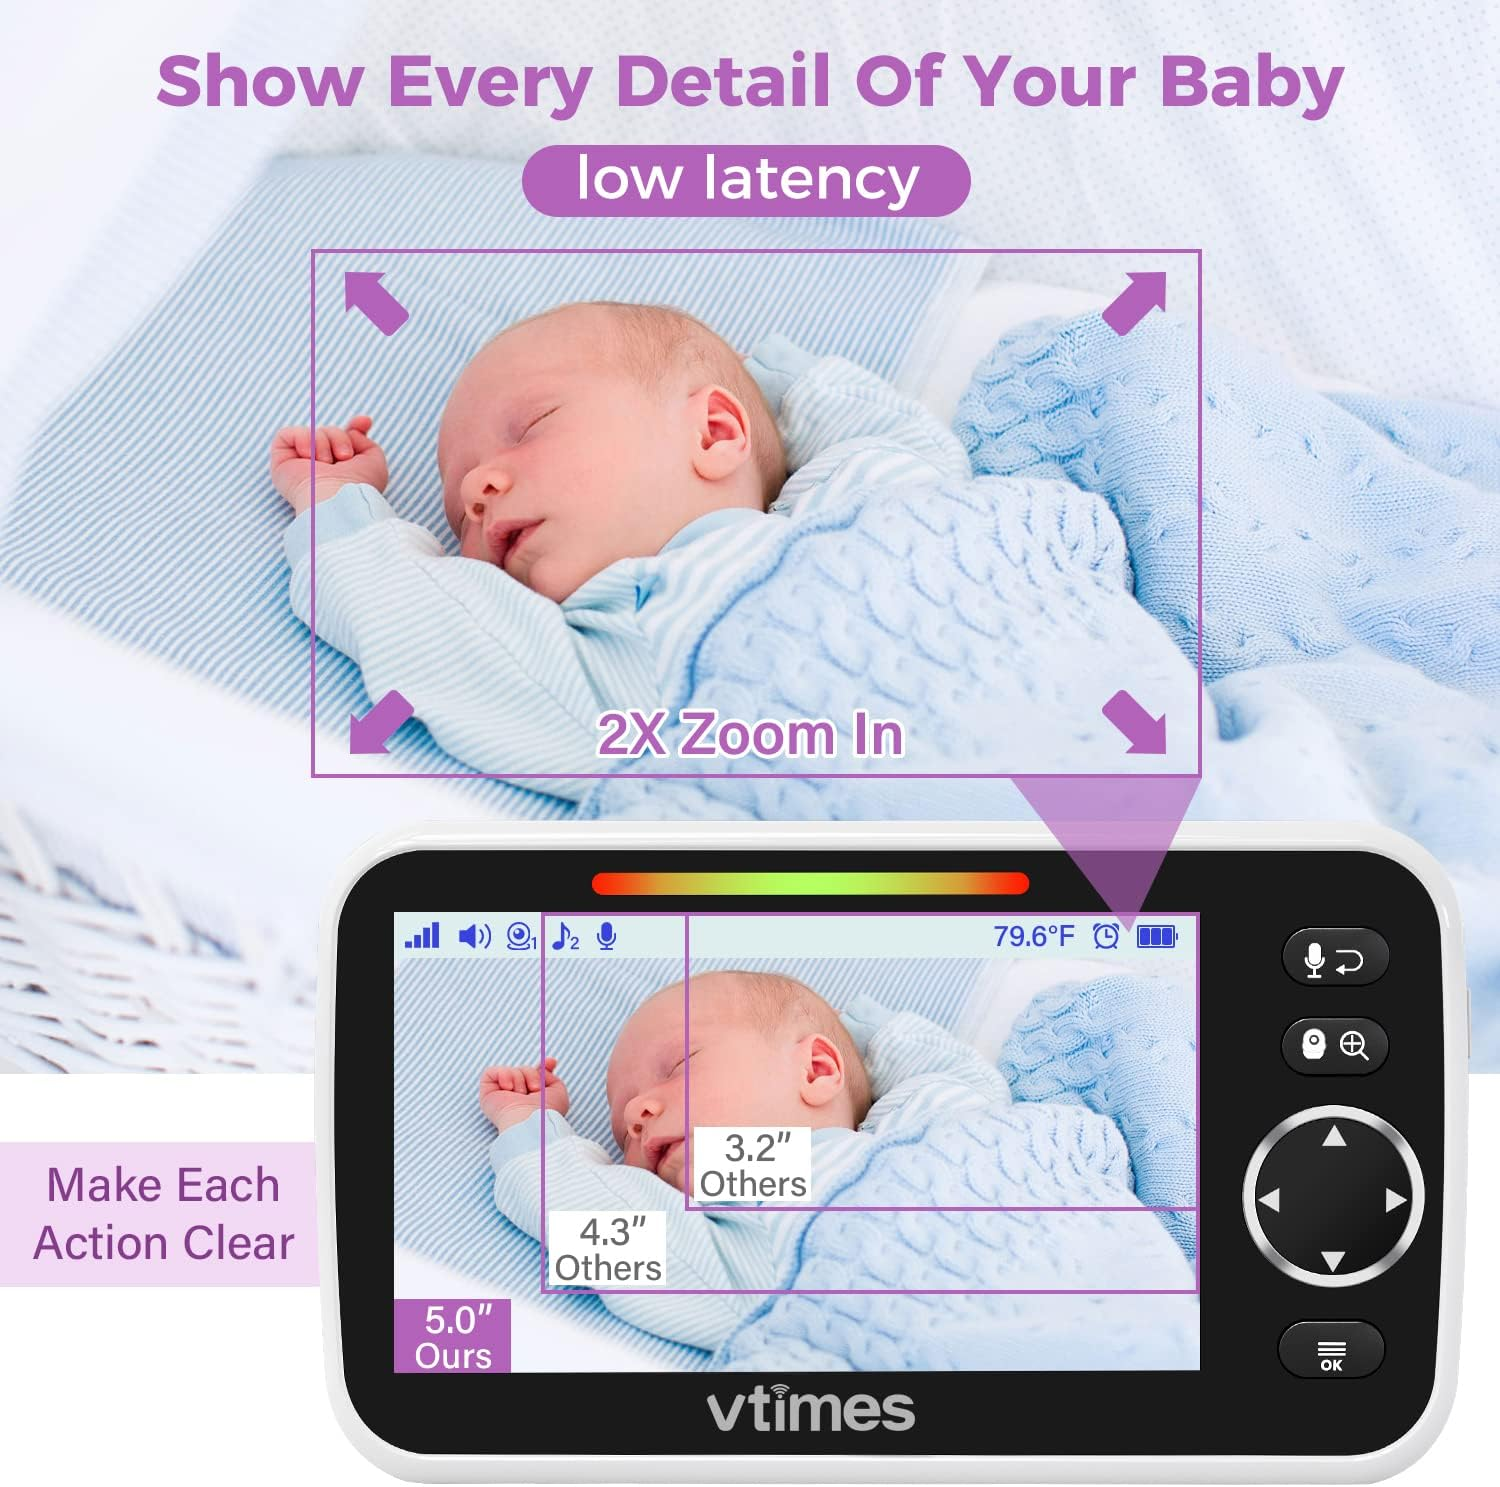 hellobaby best baby monitor - VTimes VT50T  Baby Monitor Video Baby Monitor with Camera and Audio No WiFi 5" LCD Screen, Two-Way Audio, Night Vision,1000ft Range, 2X Zoom Temperature Display, Lullaby Elderly Pet  